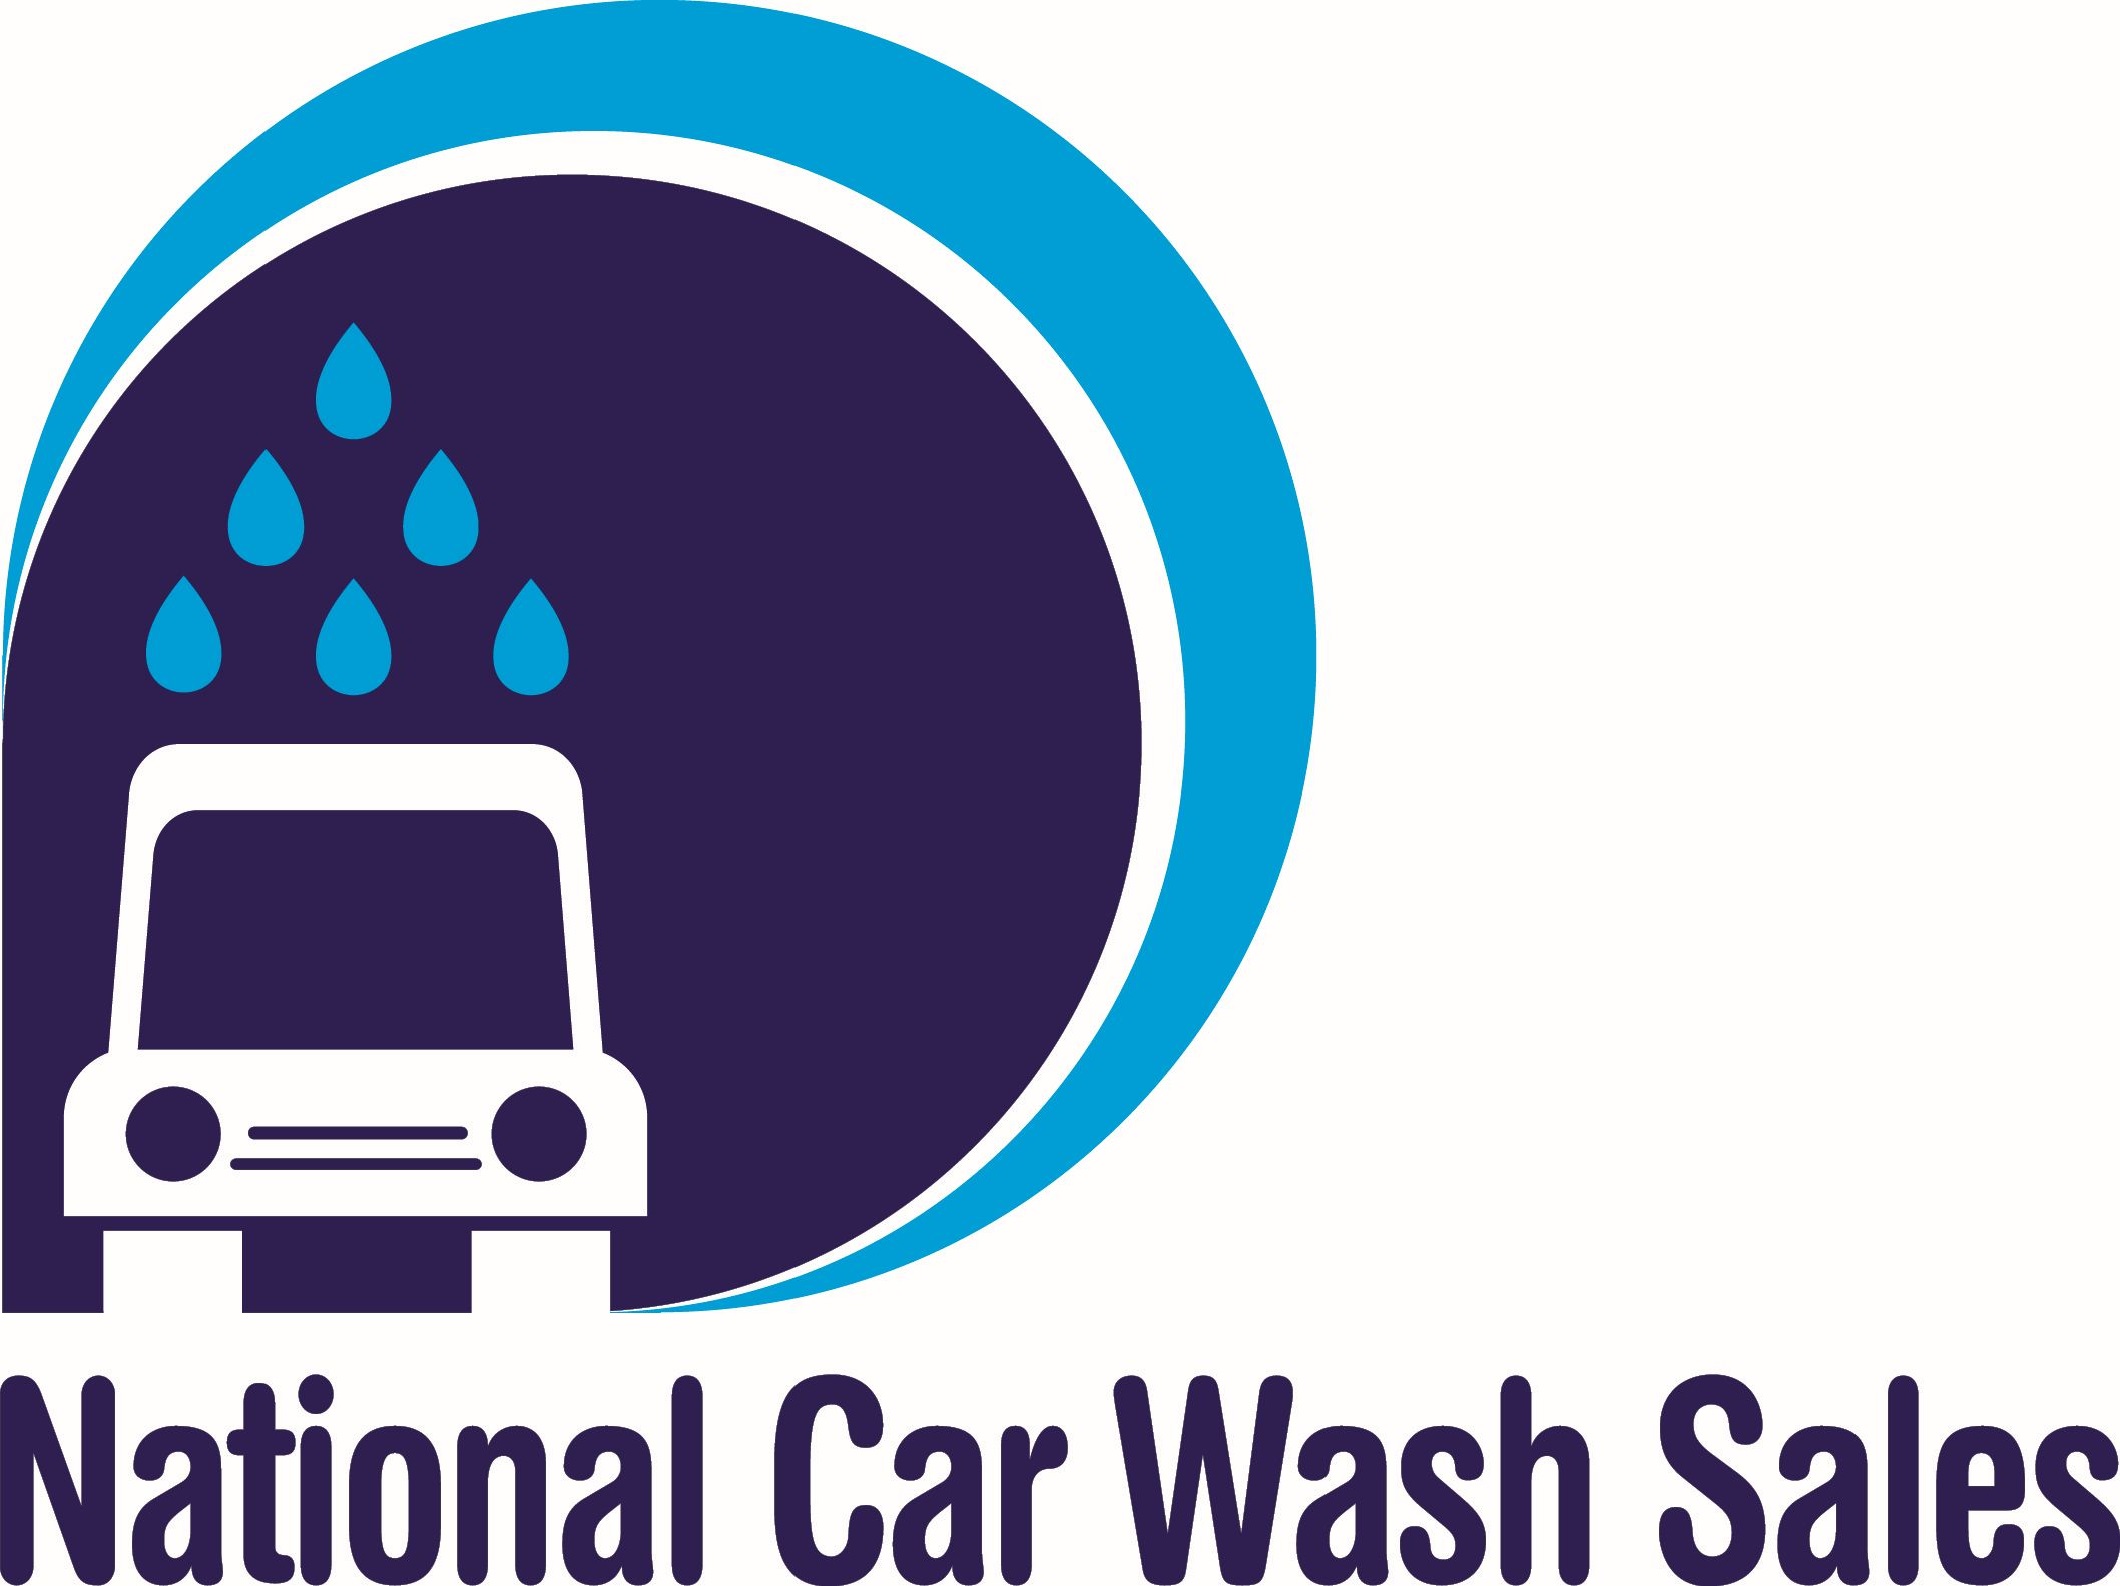 10 WELCOME EVENT NATIONAL carwash sales